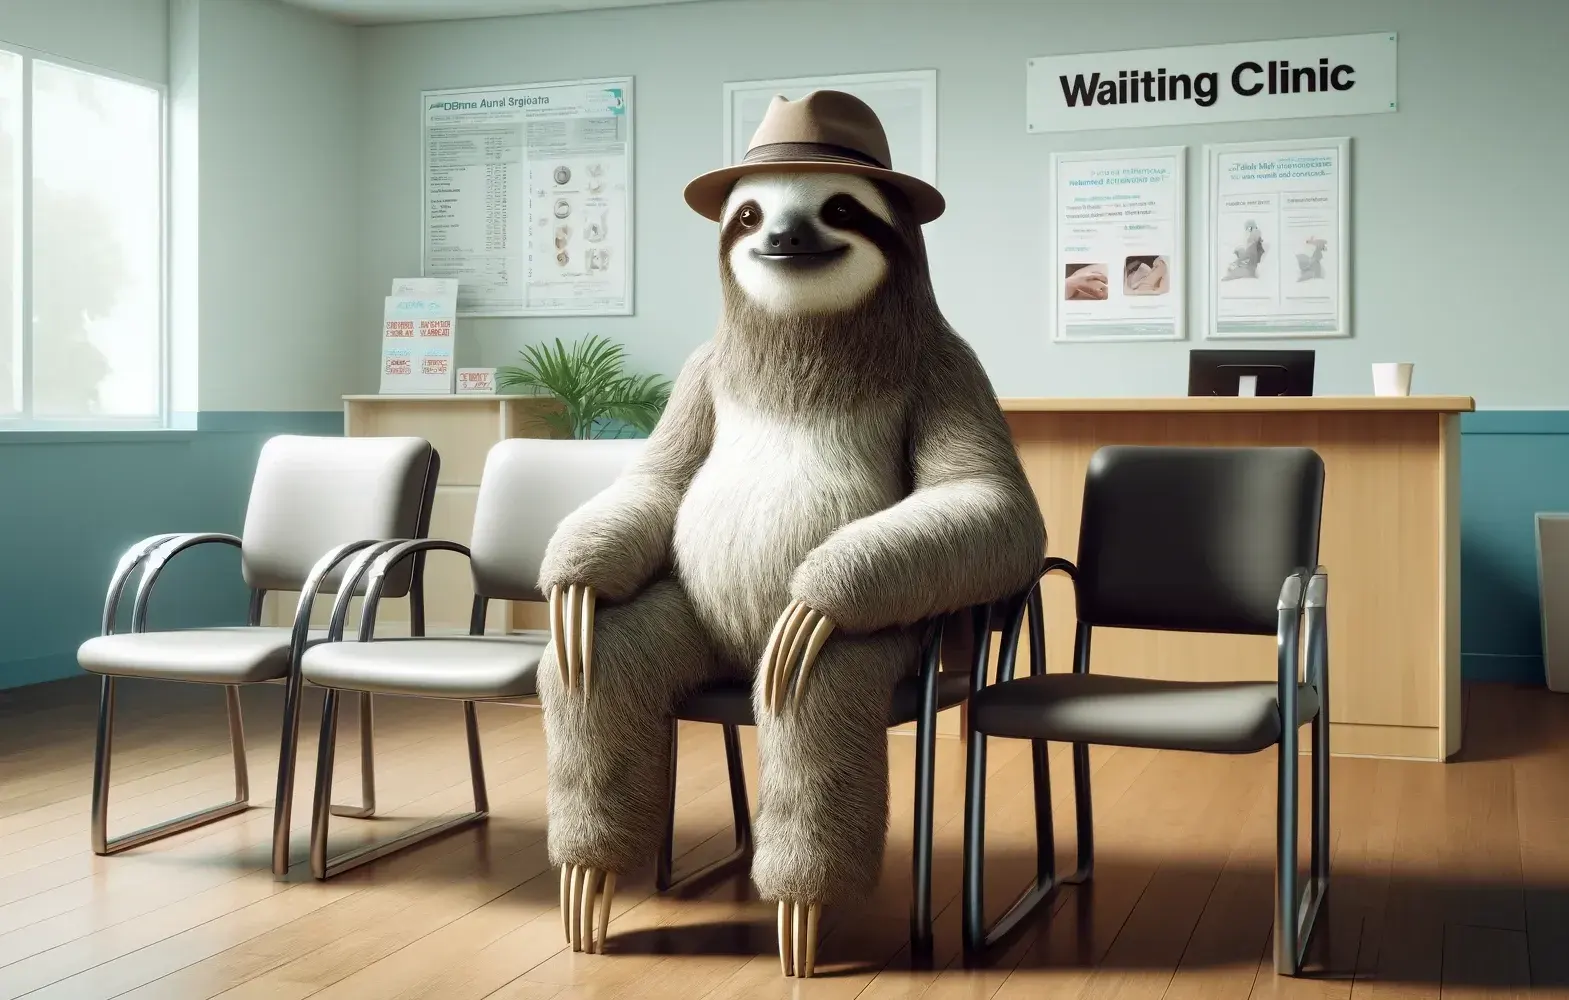 sloth waiting for clinic